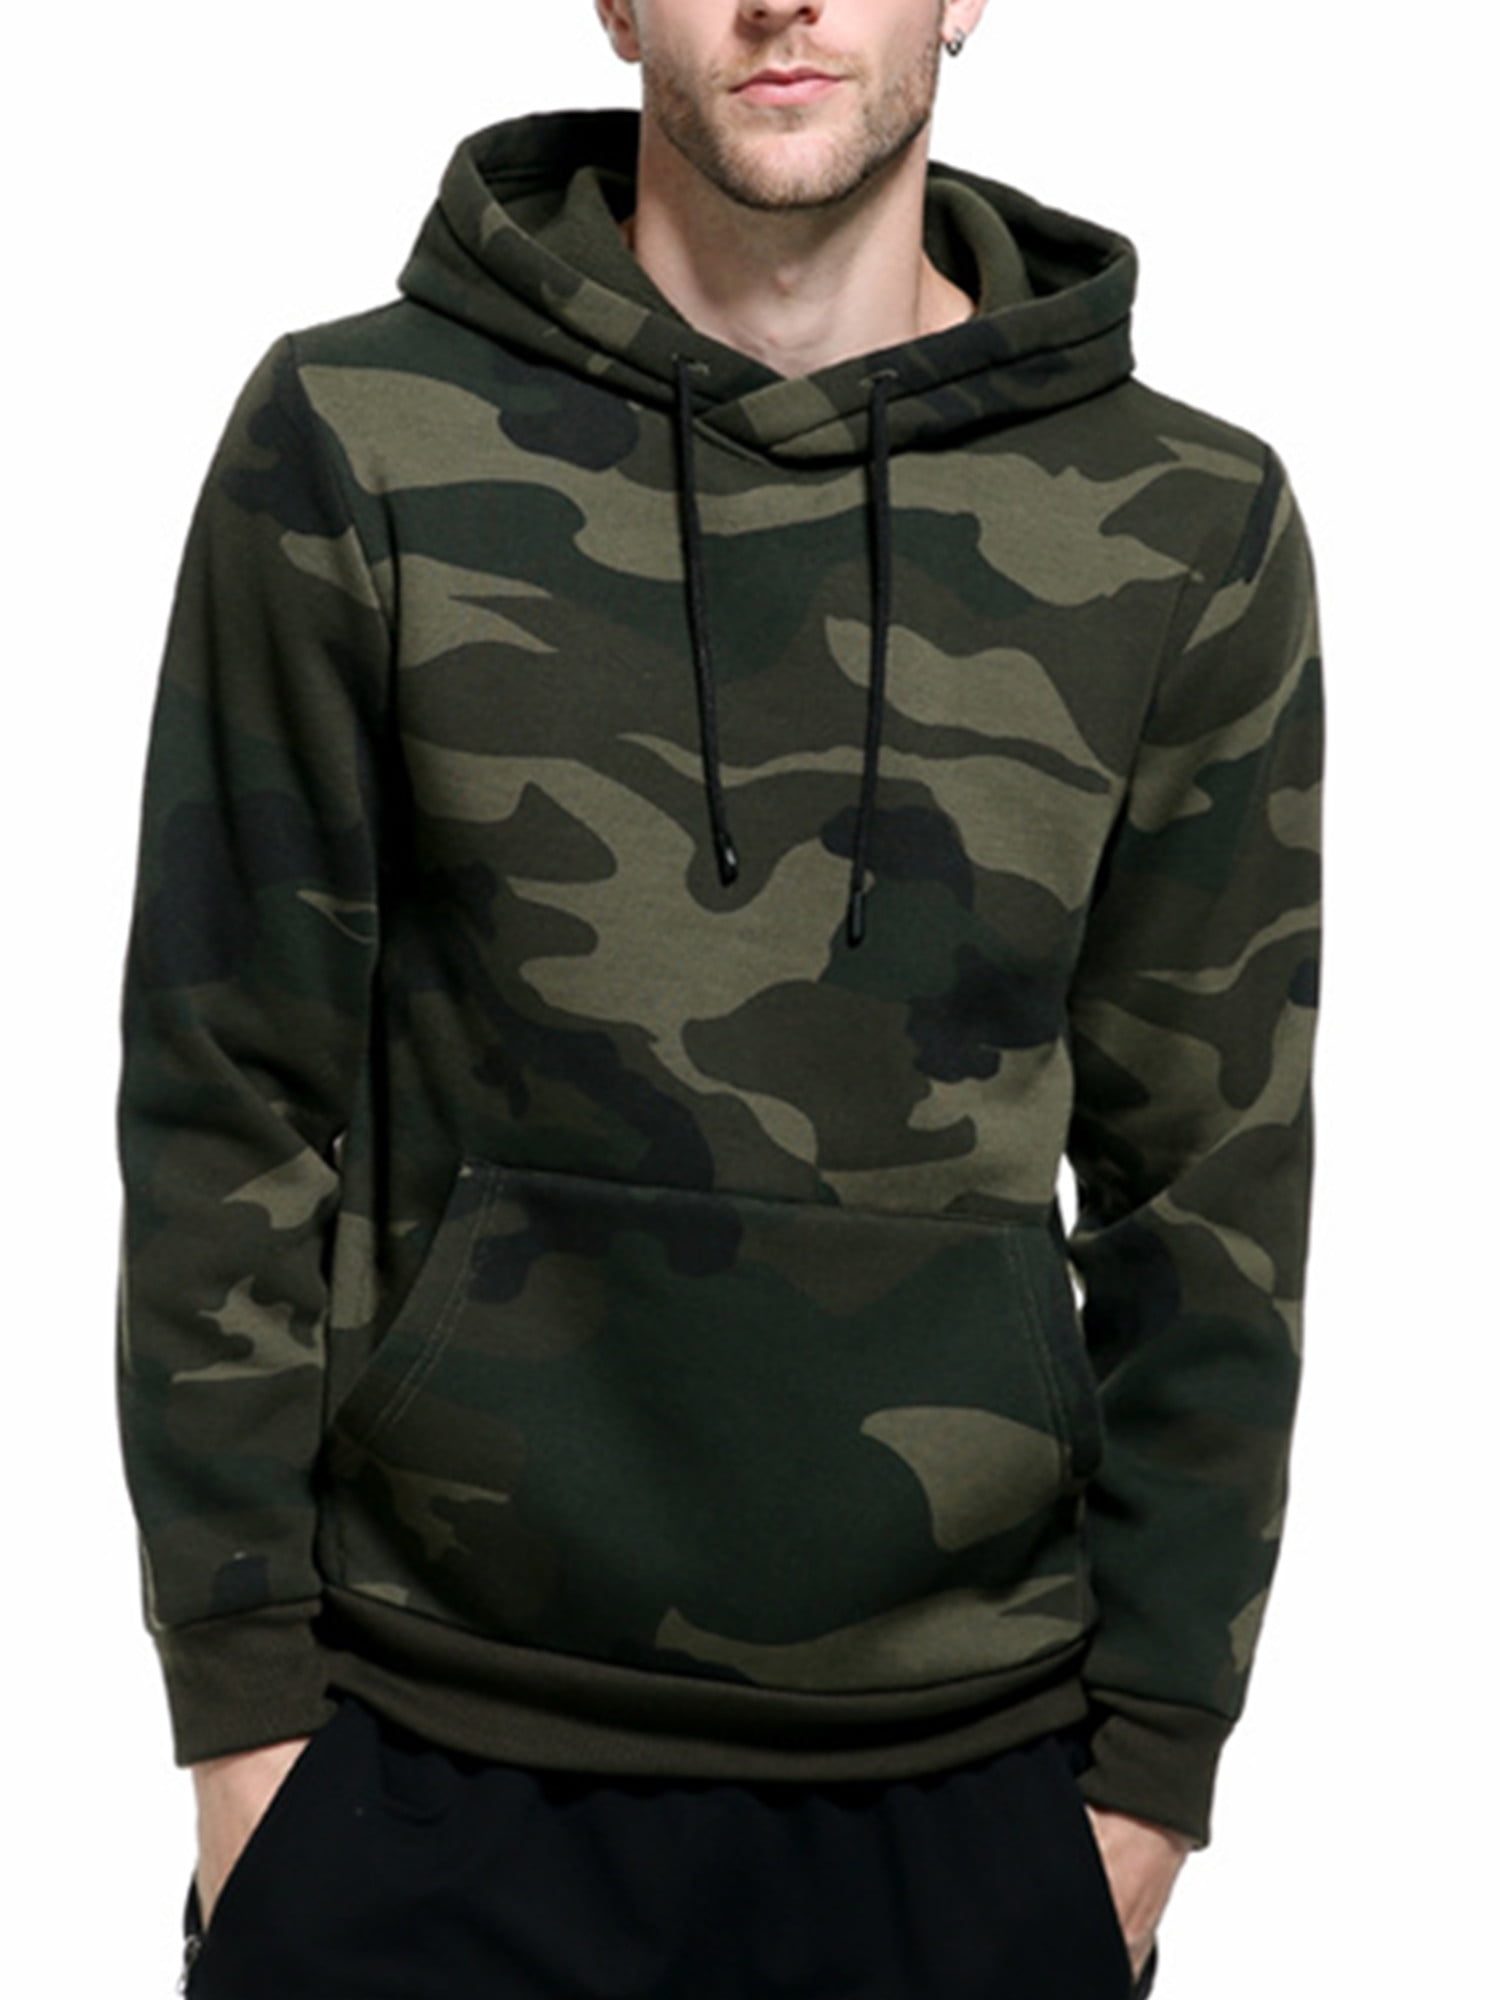 Camo Hooded Sweatshirts in Sizes M-3XL Mens Hoodies Zipper Slim Casual Long Sleeve Camo Patchwork Hooded Pullover 